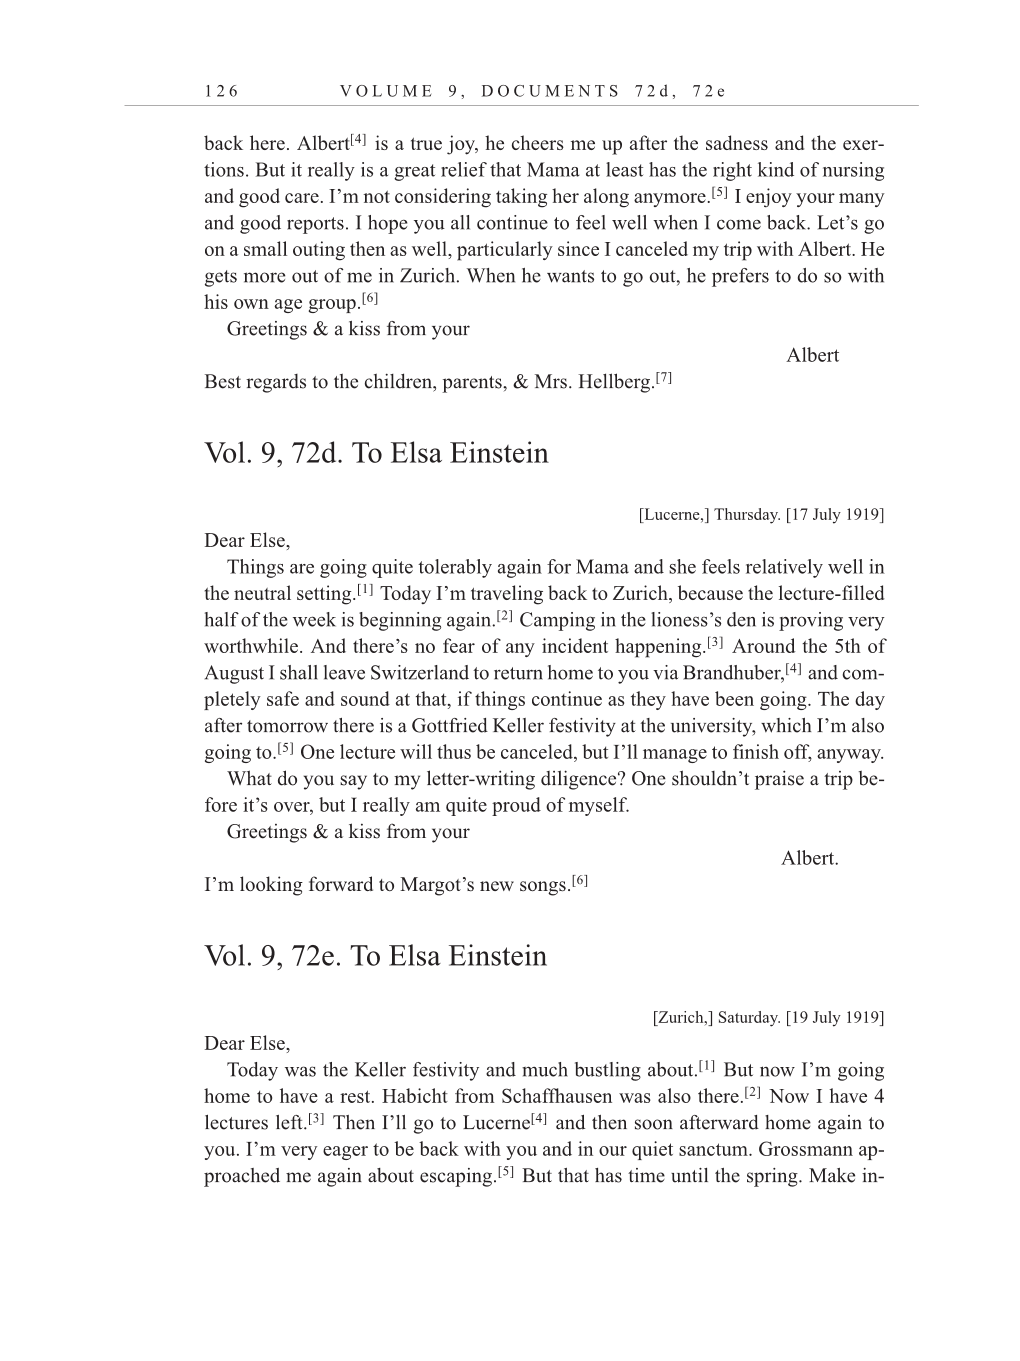 Volume 10: The Berlin Years: Correspondence, May-December 1920, and Supplementary Correspondence, 1909-1920 (English translation supplement) page 126